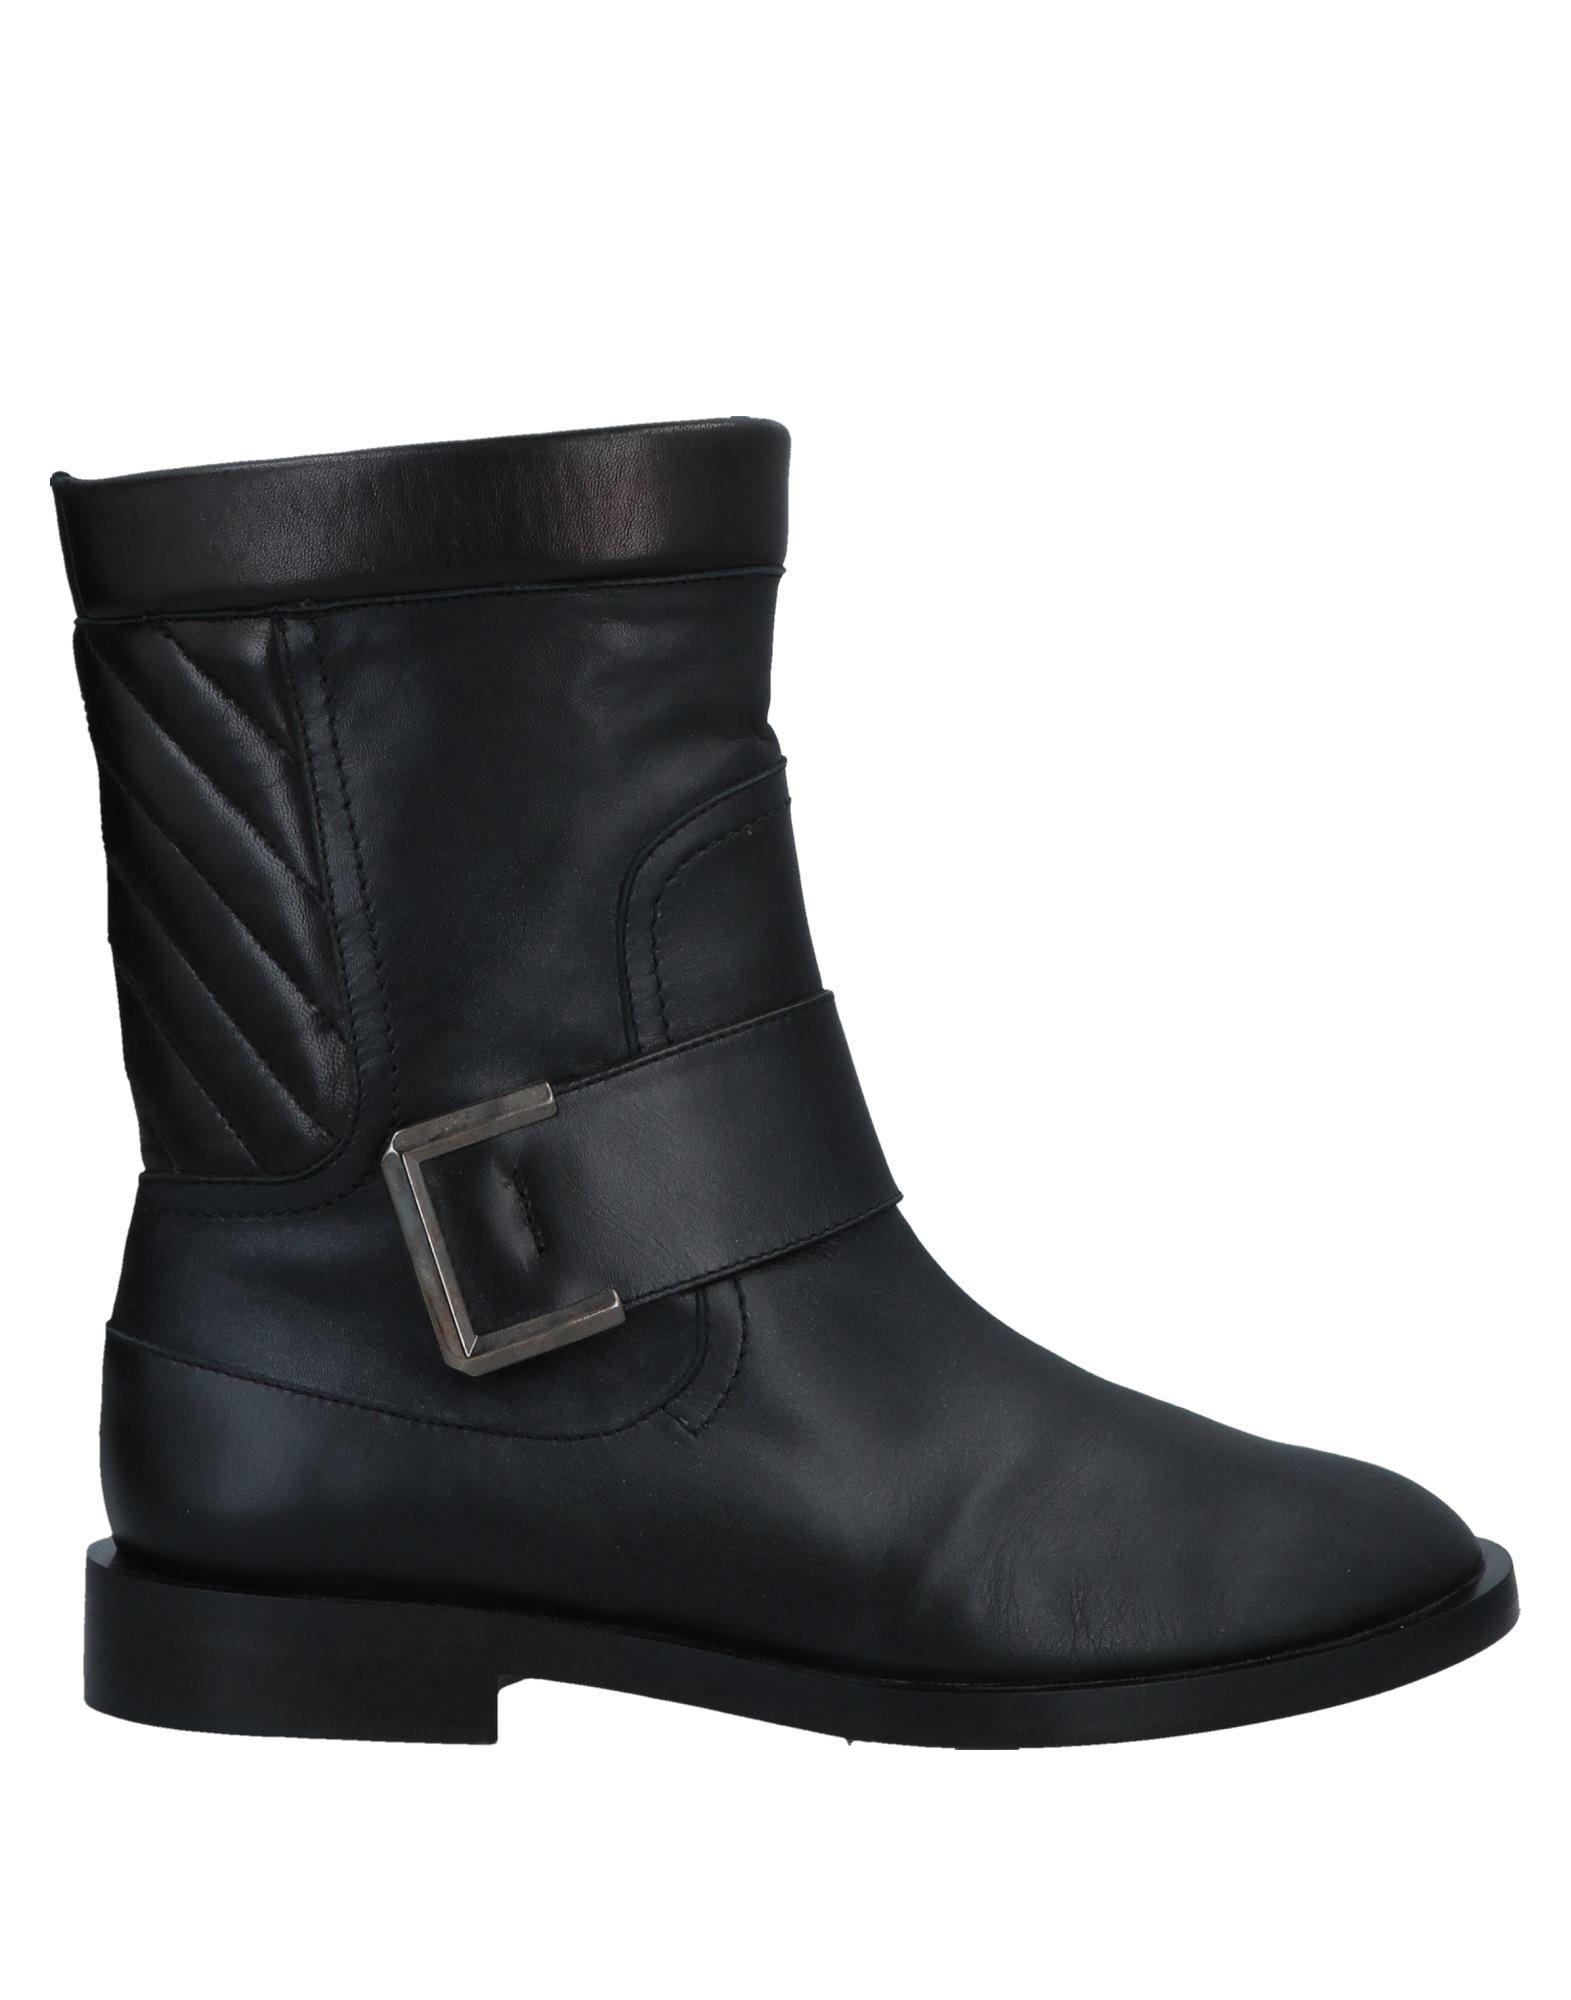 Robert Clergerie Leather Ankle Boots in Black - Lyst